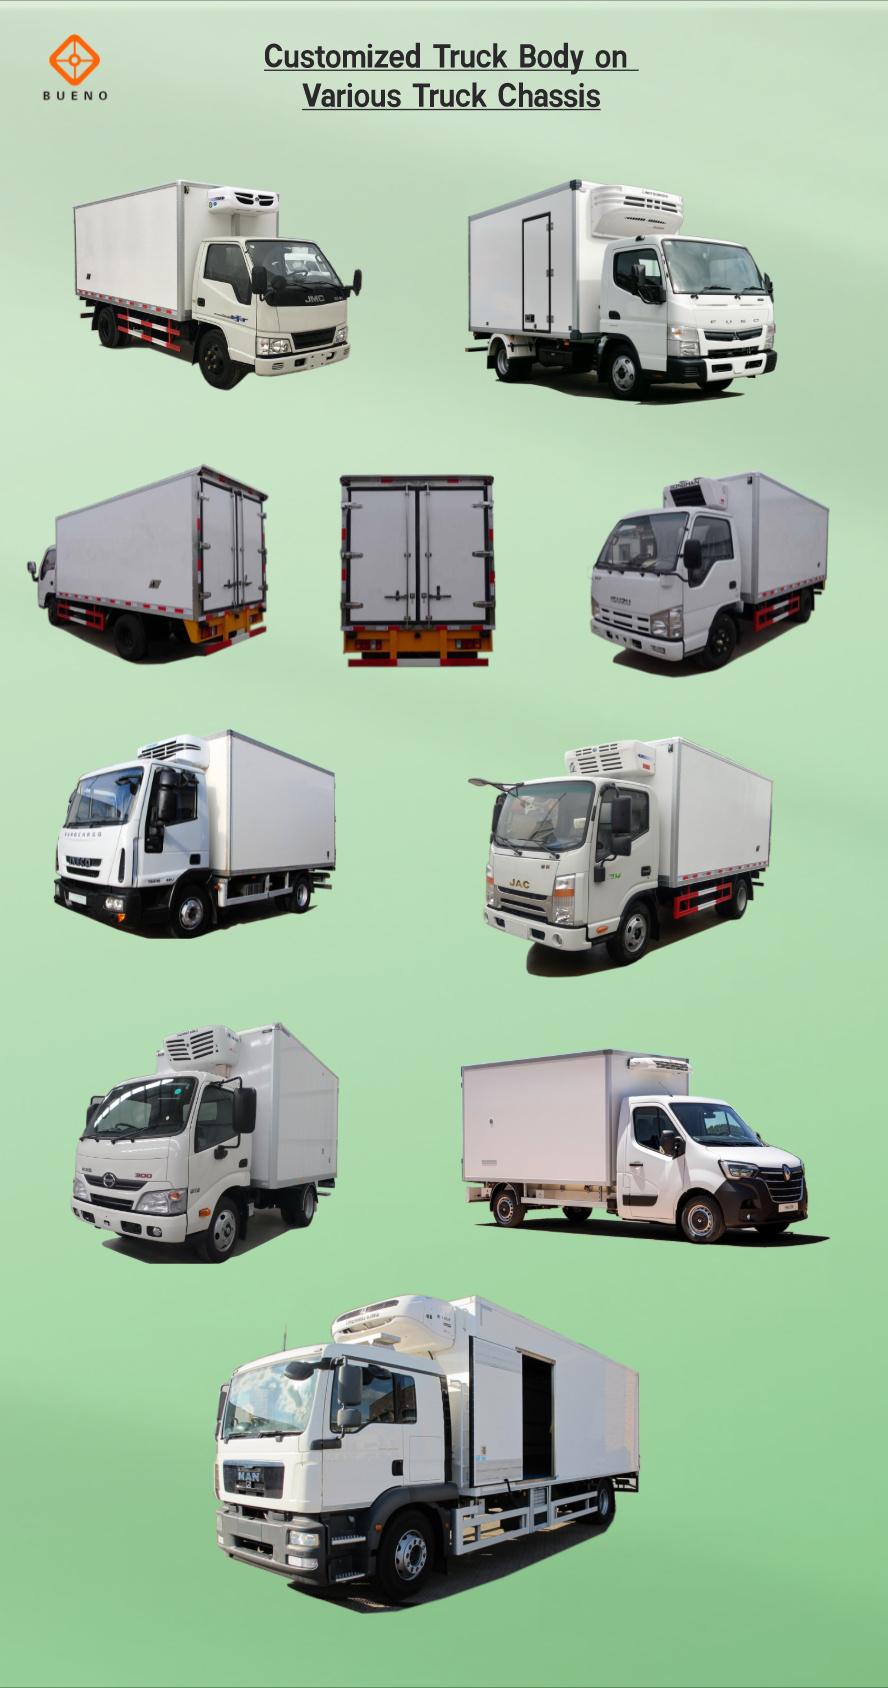 FRP/GRP Refrigerated Truck Body for Transportation of Fresh Vegetables